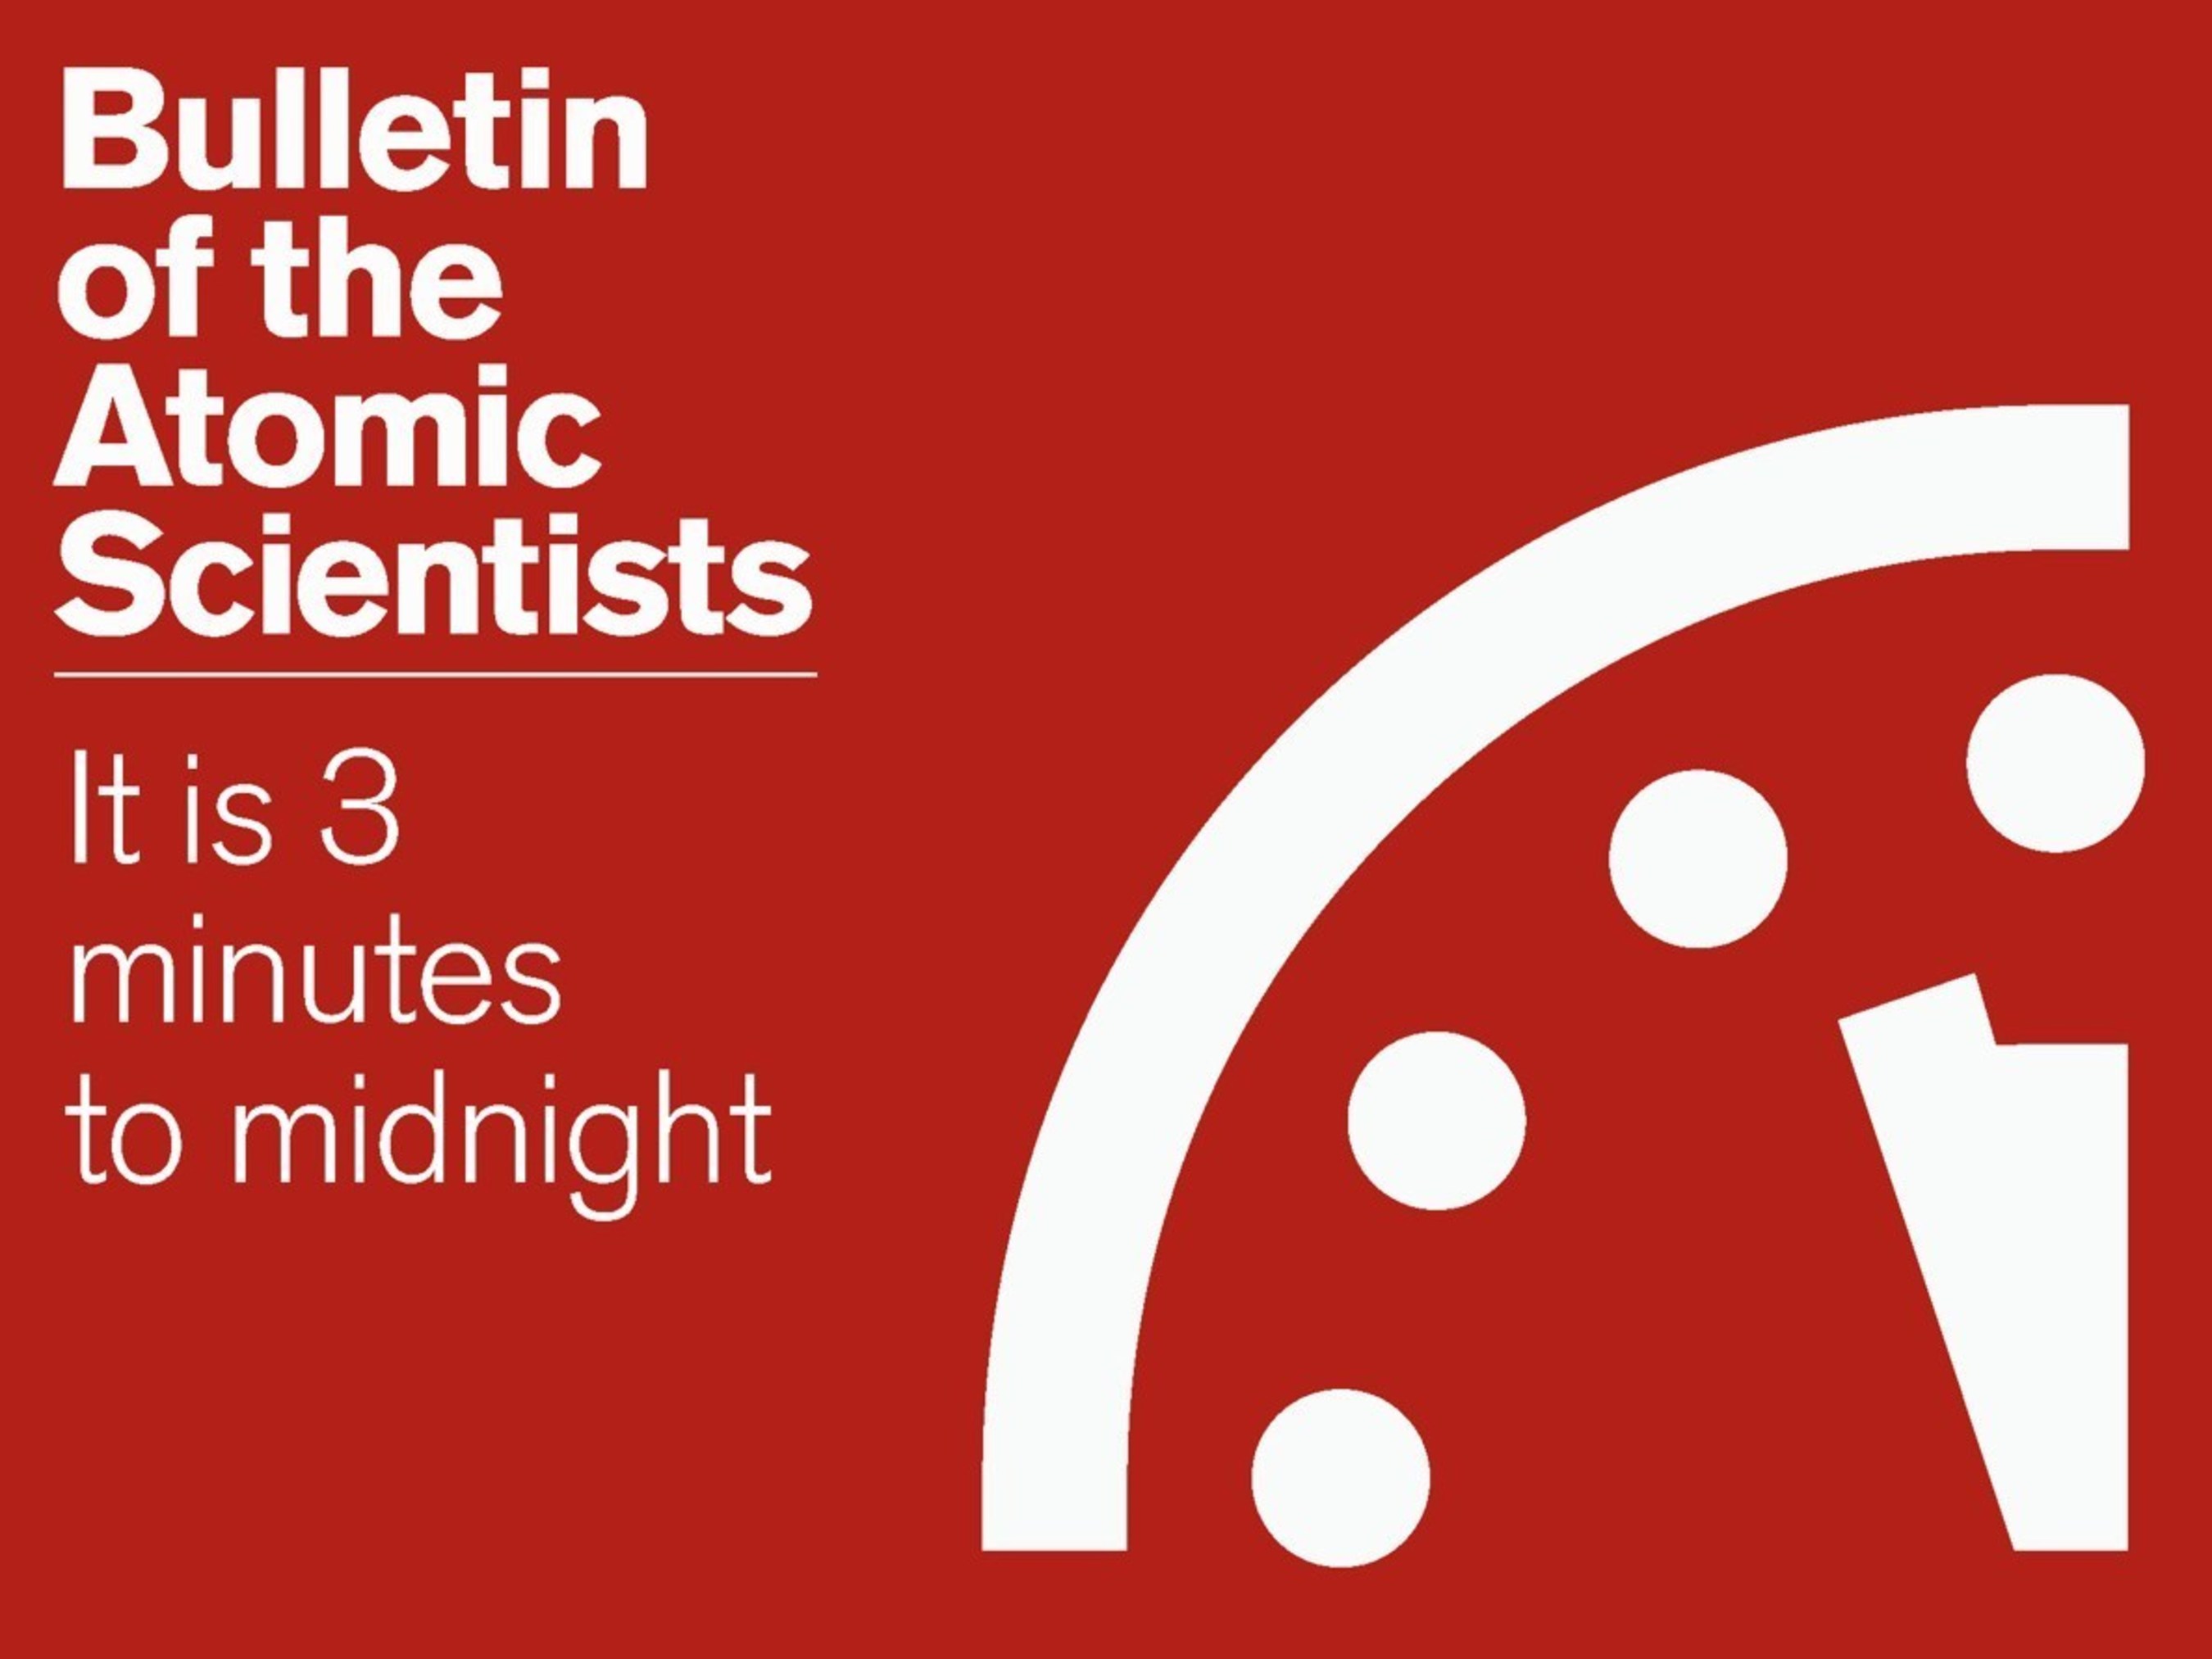 It Is 3 Minutes To Midnight - Climate Change And Nuclear Tensions Push Doomsday Clock Hands Forward